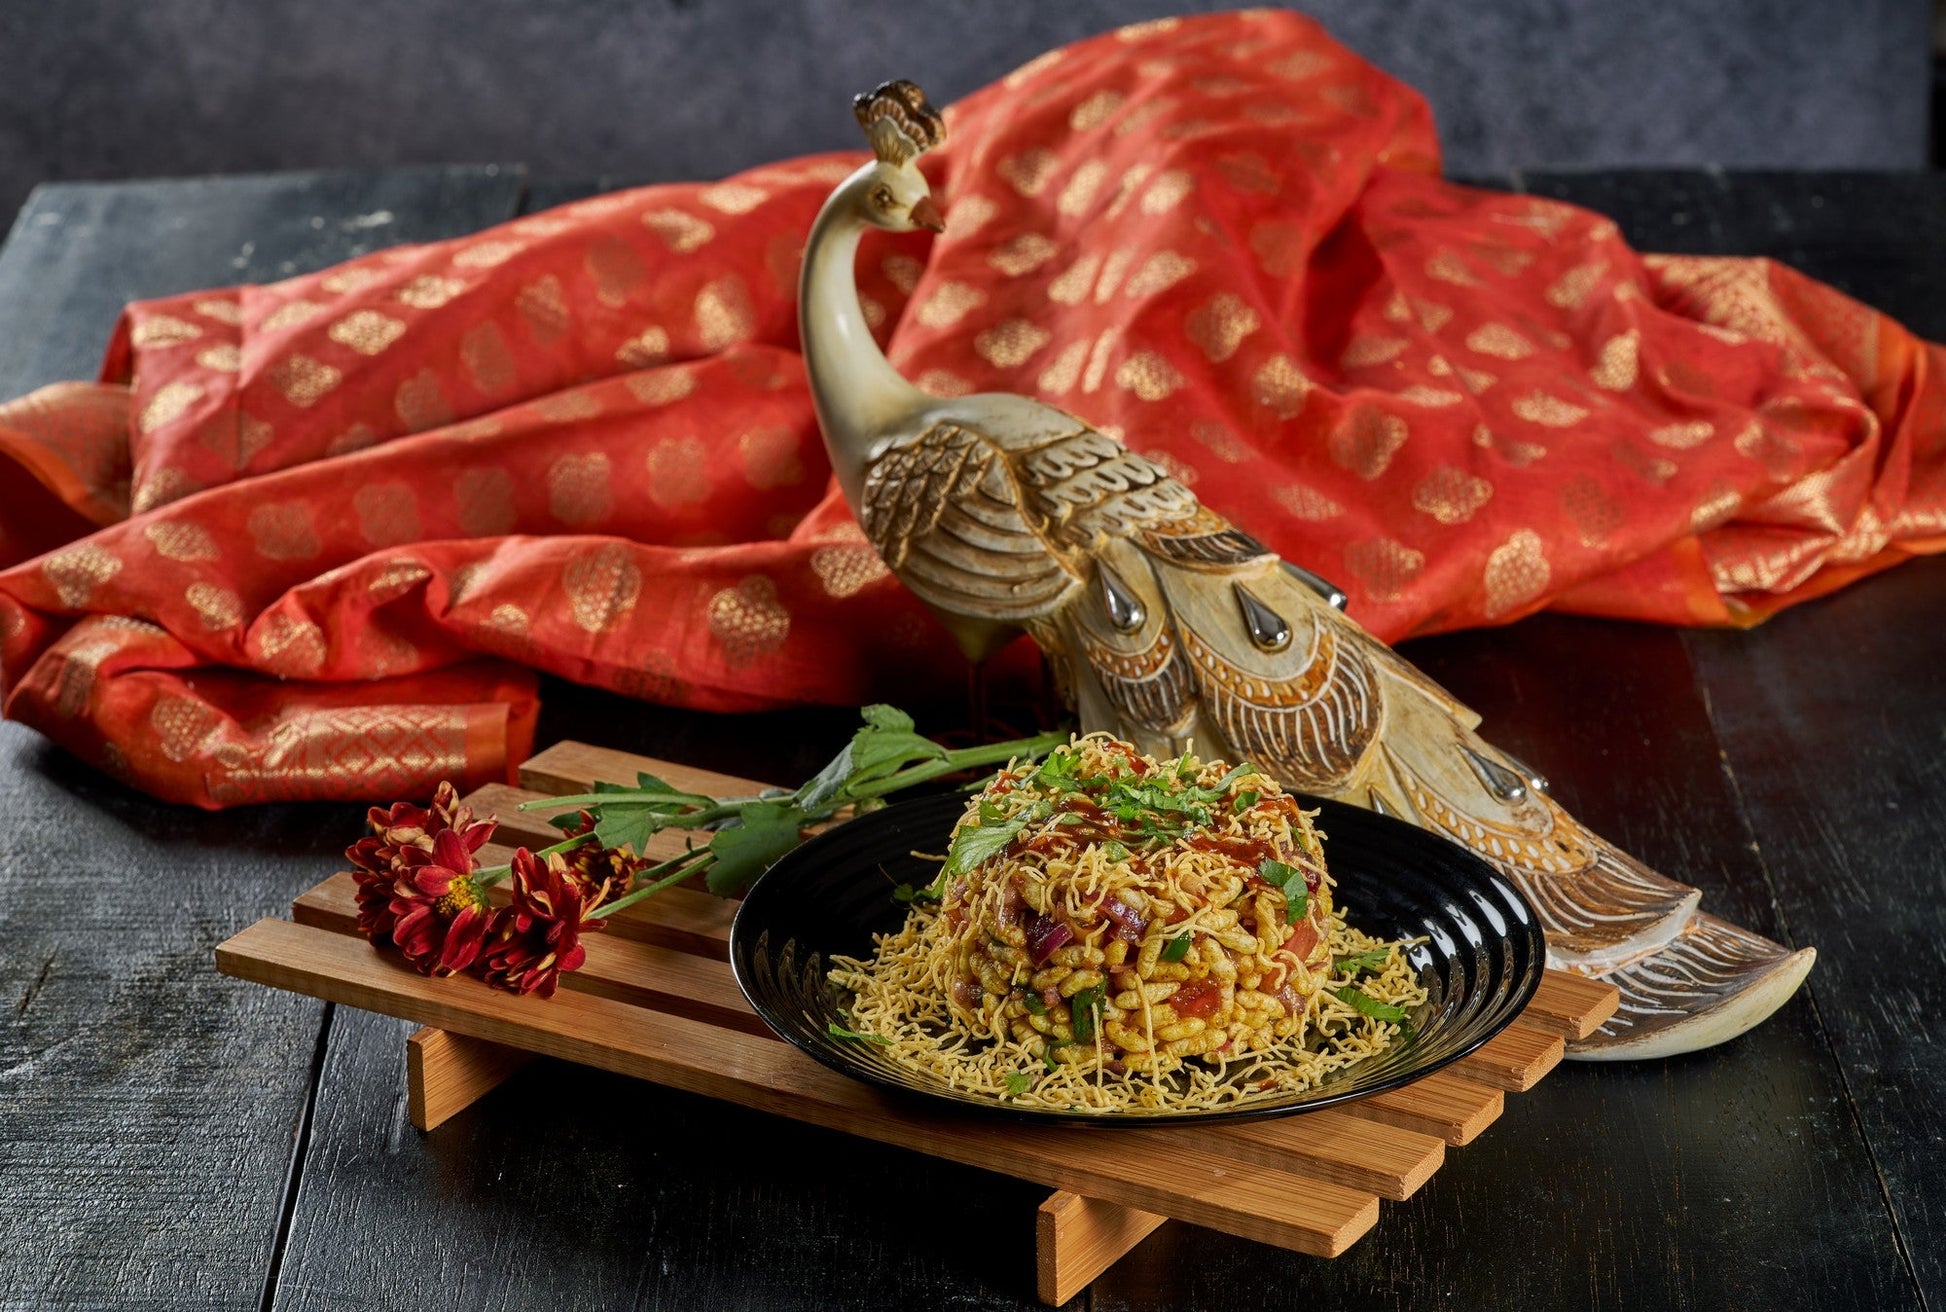 A colorful plate of Bhel Puri, a savory and refreshing Indian snack made with puffed rice, vegetables, and chutneys